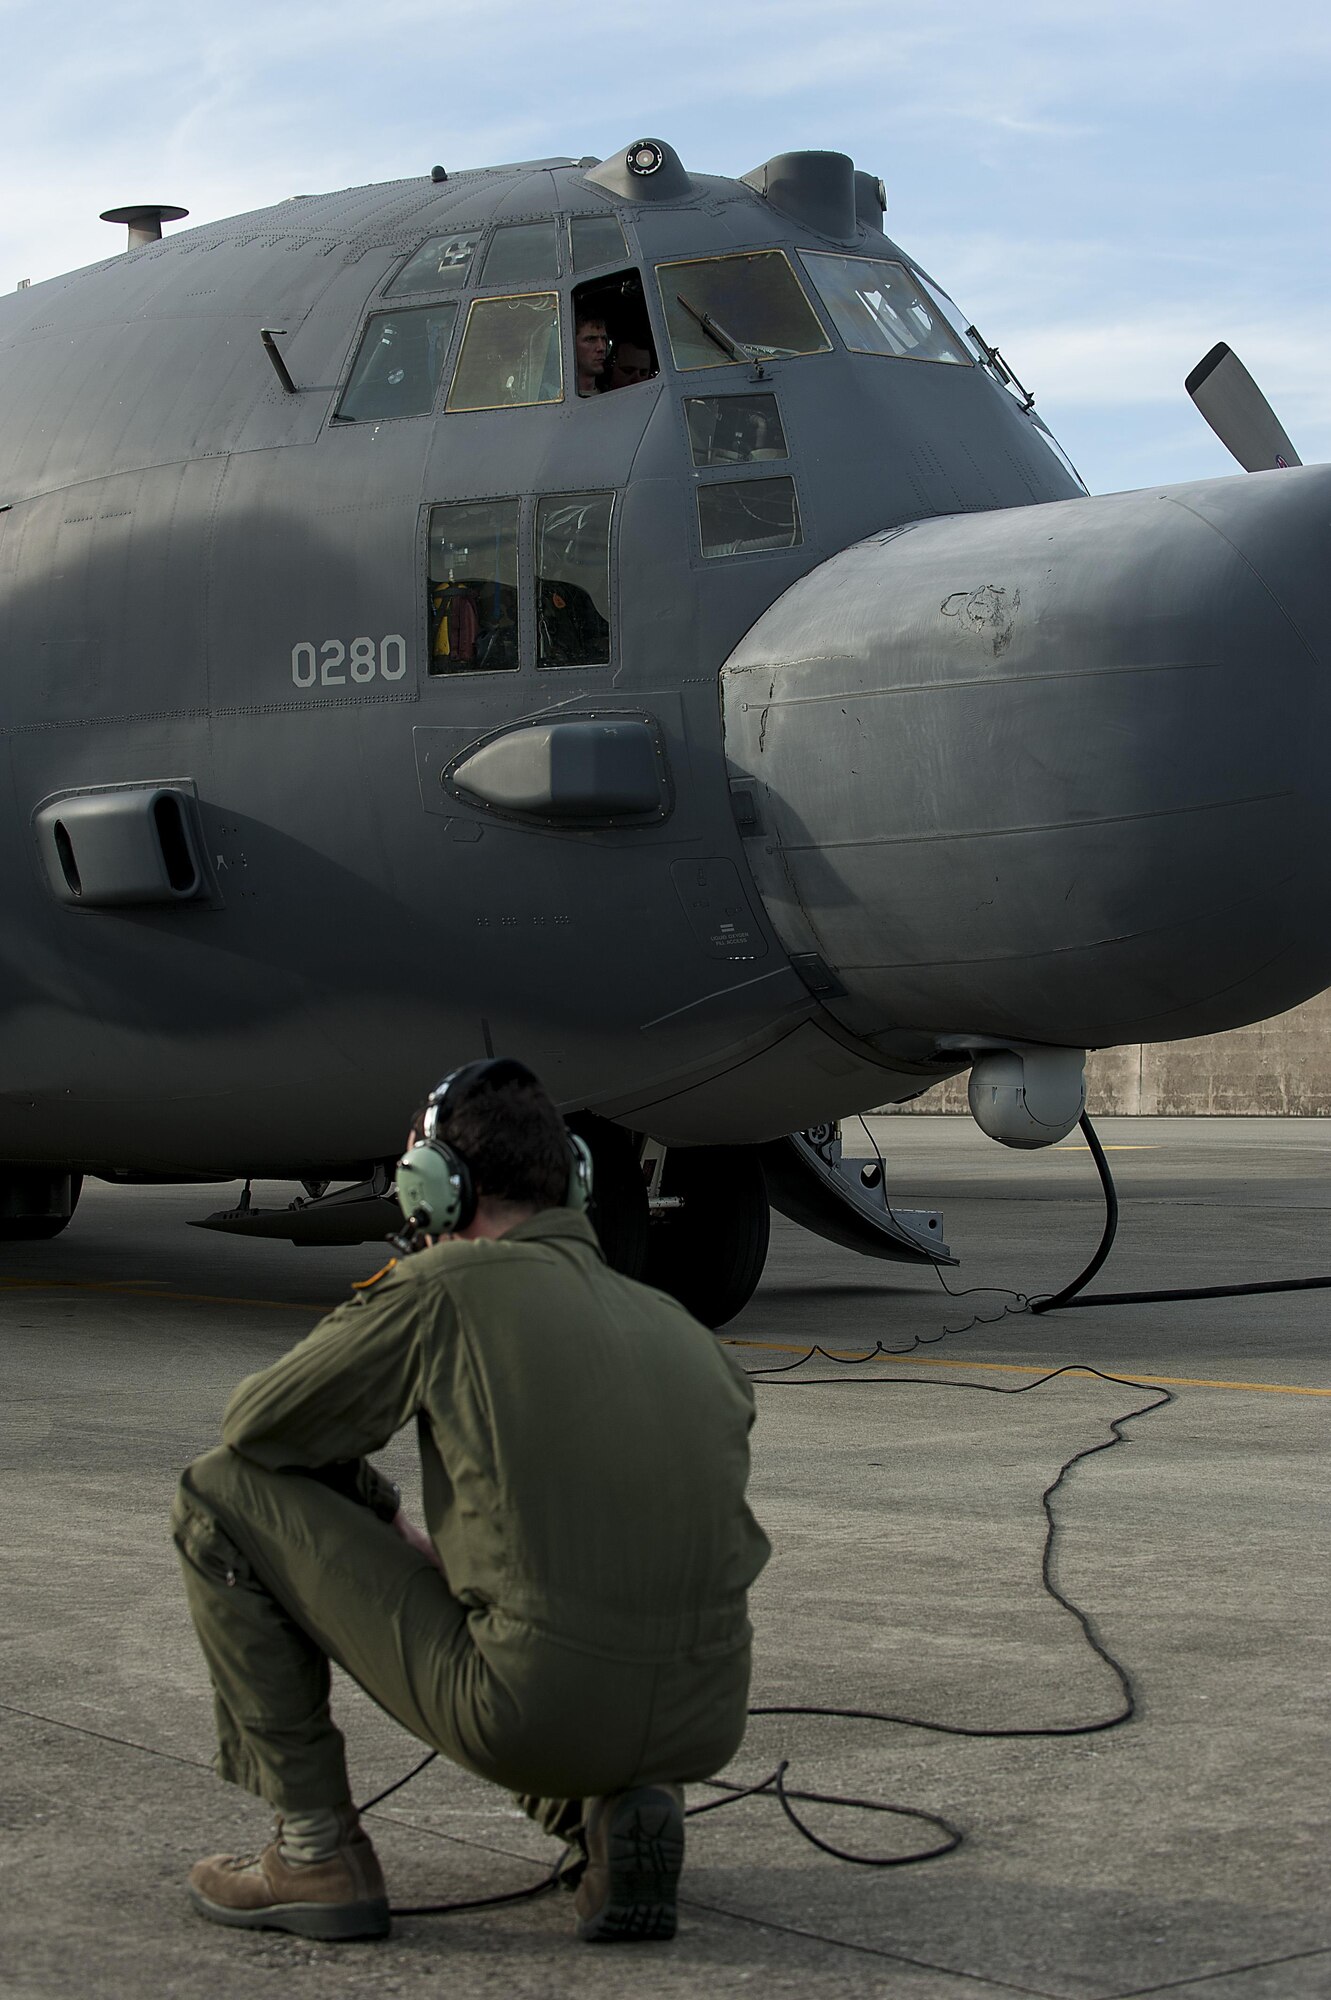 U.S. Air Force Staff Sgt. Daniel Sterns, an MC-130H Combat Talon II loadmaster from the 1st Special Operations Squadron watches as the pilot start the aircraft’s engines before takeoff on the Kadena Air Base, Japan, flightline May 14, 2015.  The 1st Special Operations Squadron is one of five squadrons that make up the 353rd Special Operations Group.  As the only Air Force special operations group in the Pacific, they are the focal point for Air Force special operations activities throughout the United States Pacific Command Theater.  (U.S. Air Force photo by Senior Airman Stephen G. Eigel)